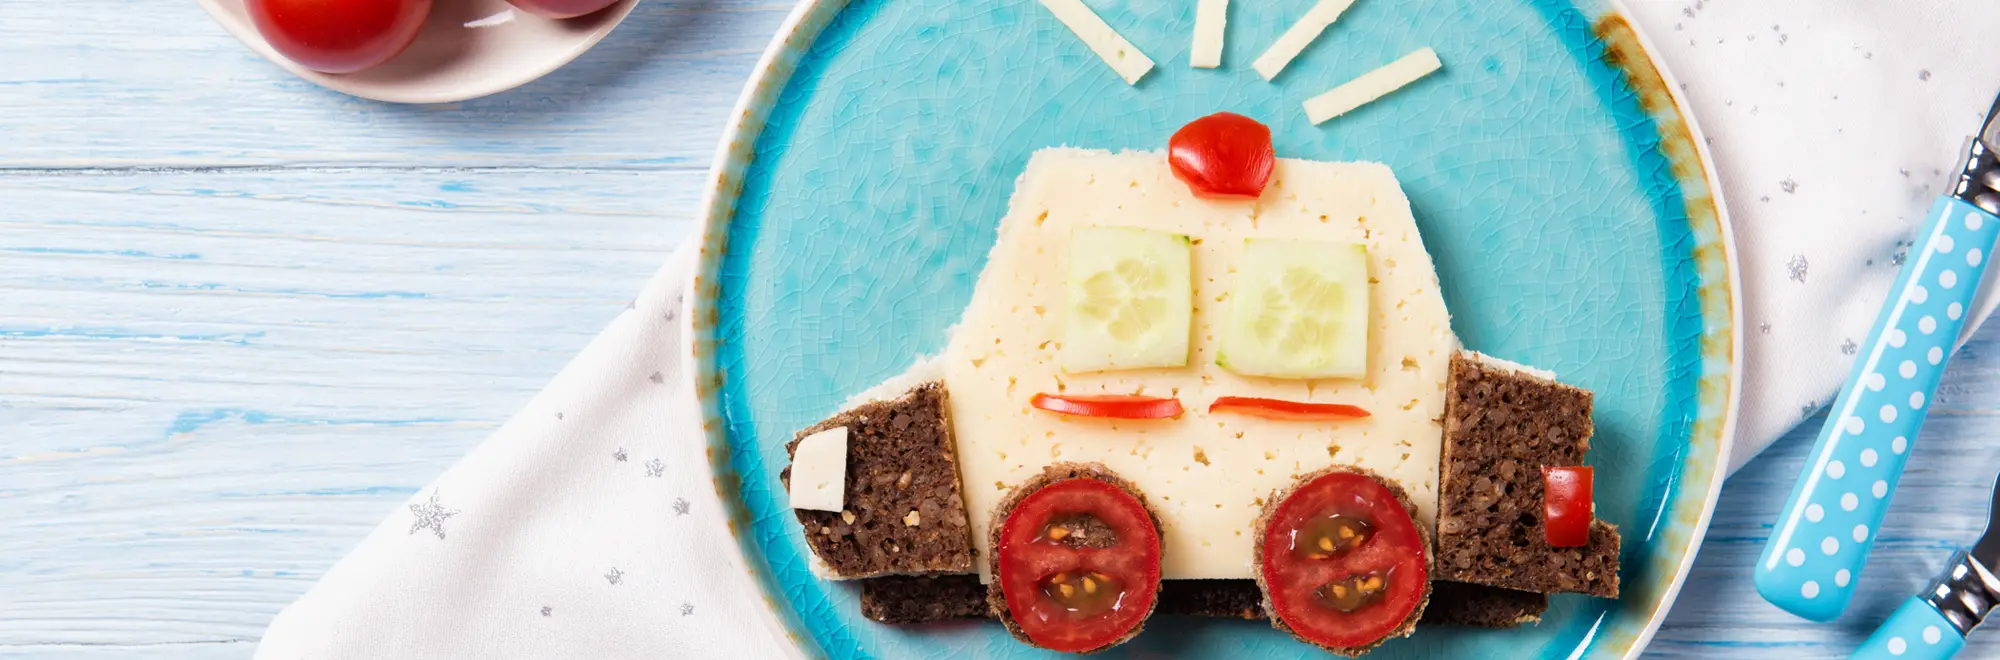 Fast, easy and nutritious recipes for kids.